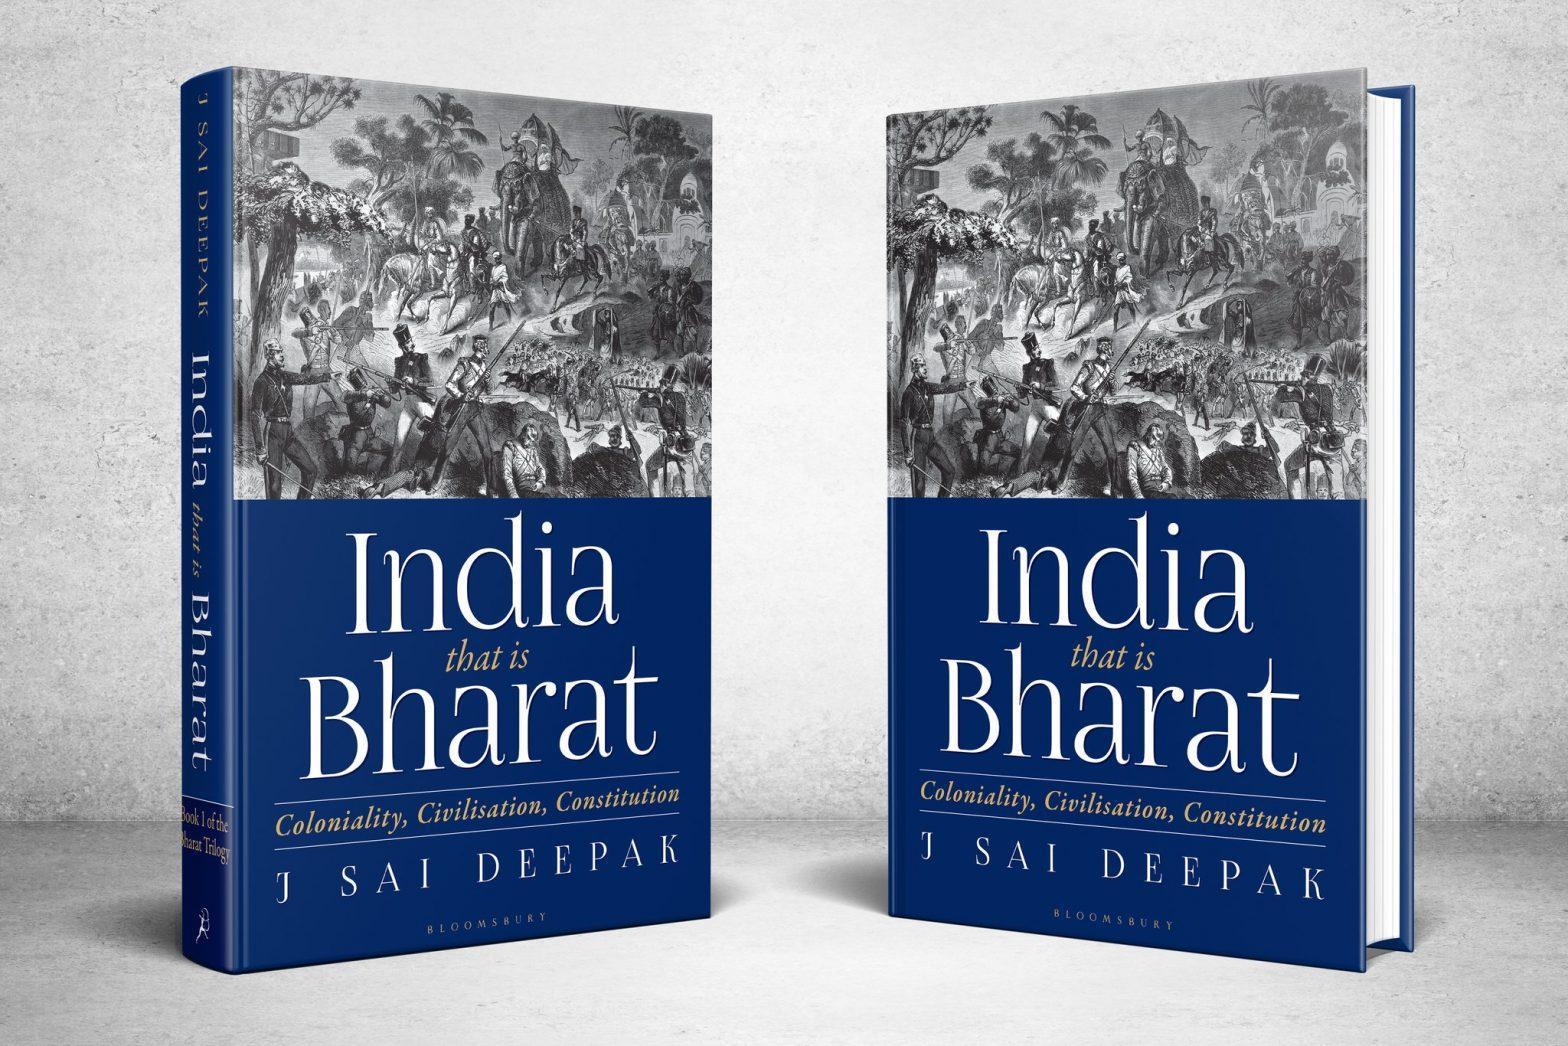 ‘India, That is Bharat: Coloniality, Civilisation, Constitution’ authored by J Sai Deepak